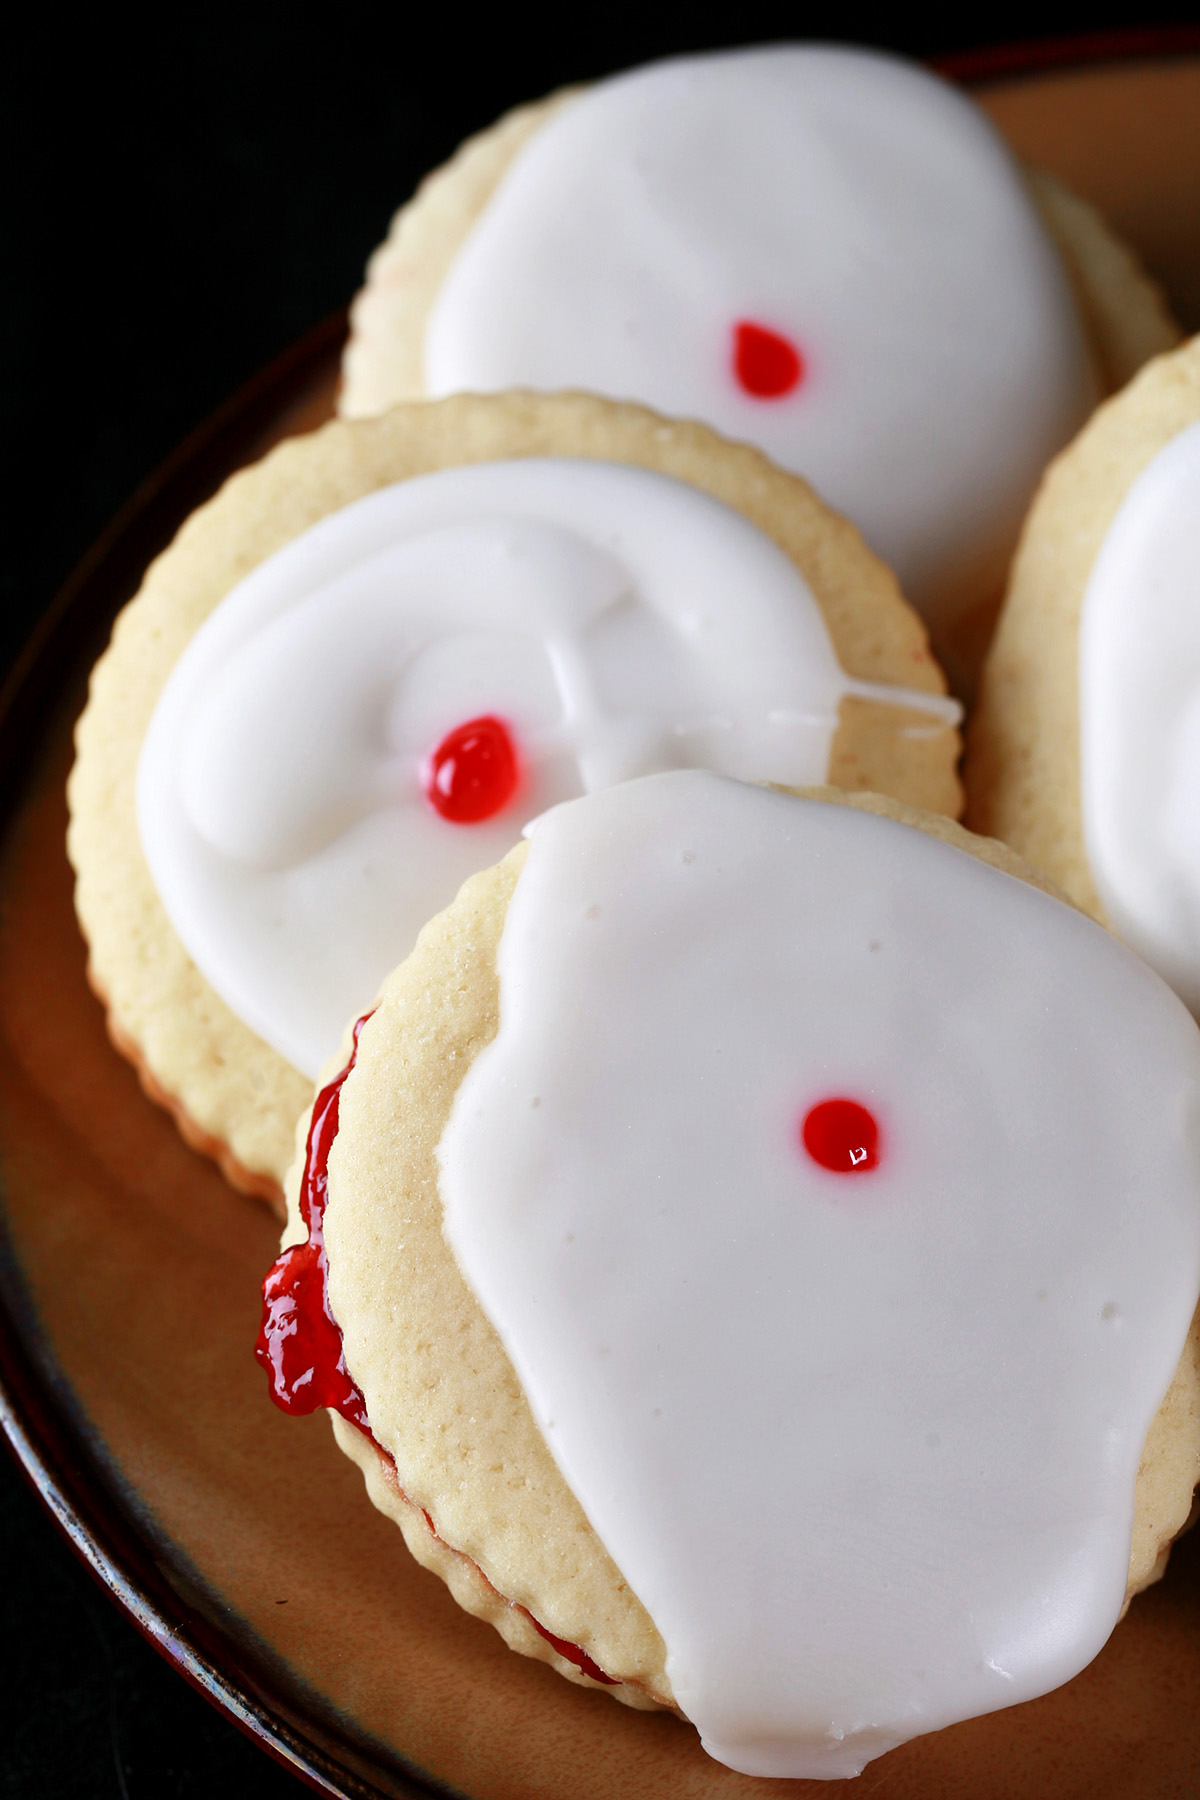 Close up view of a plate of gluten-free imperial cookies: Sandwich cookies filled with raspberry jam, frosted with a white glaze, and finished off with a dot of red gel in the center.